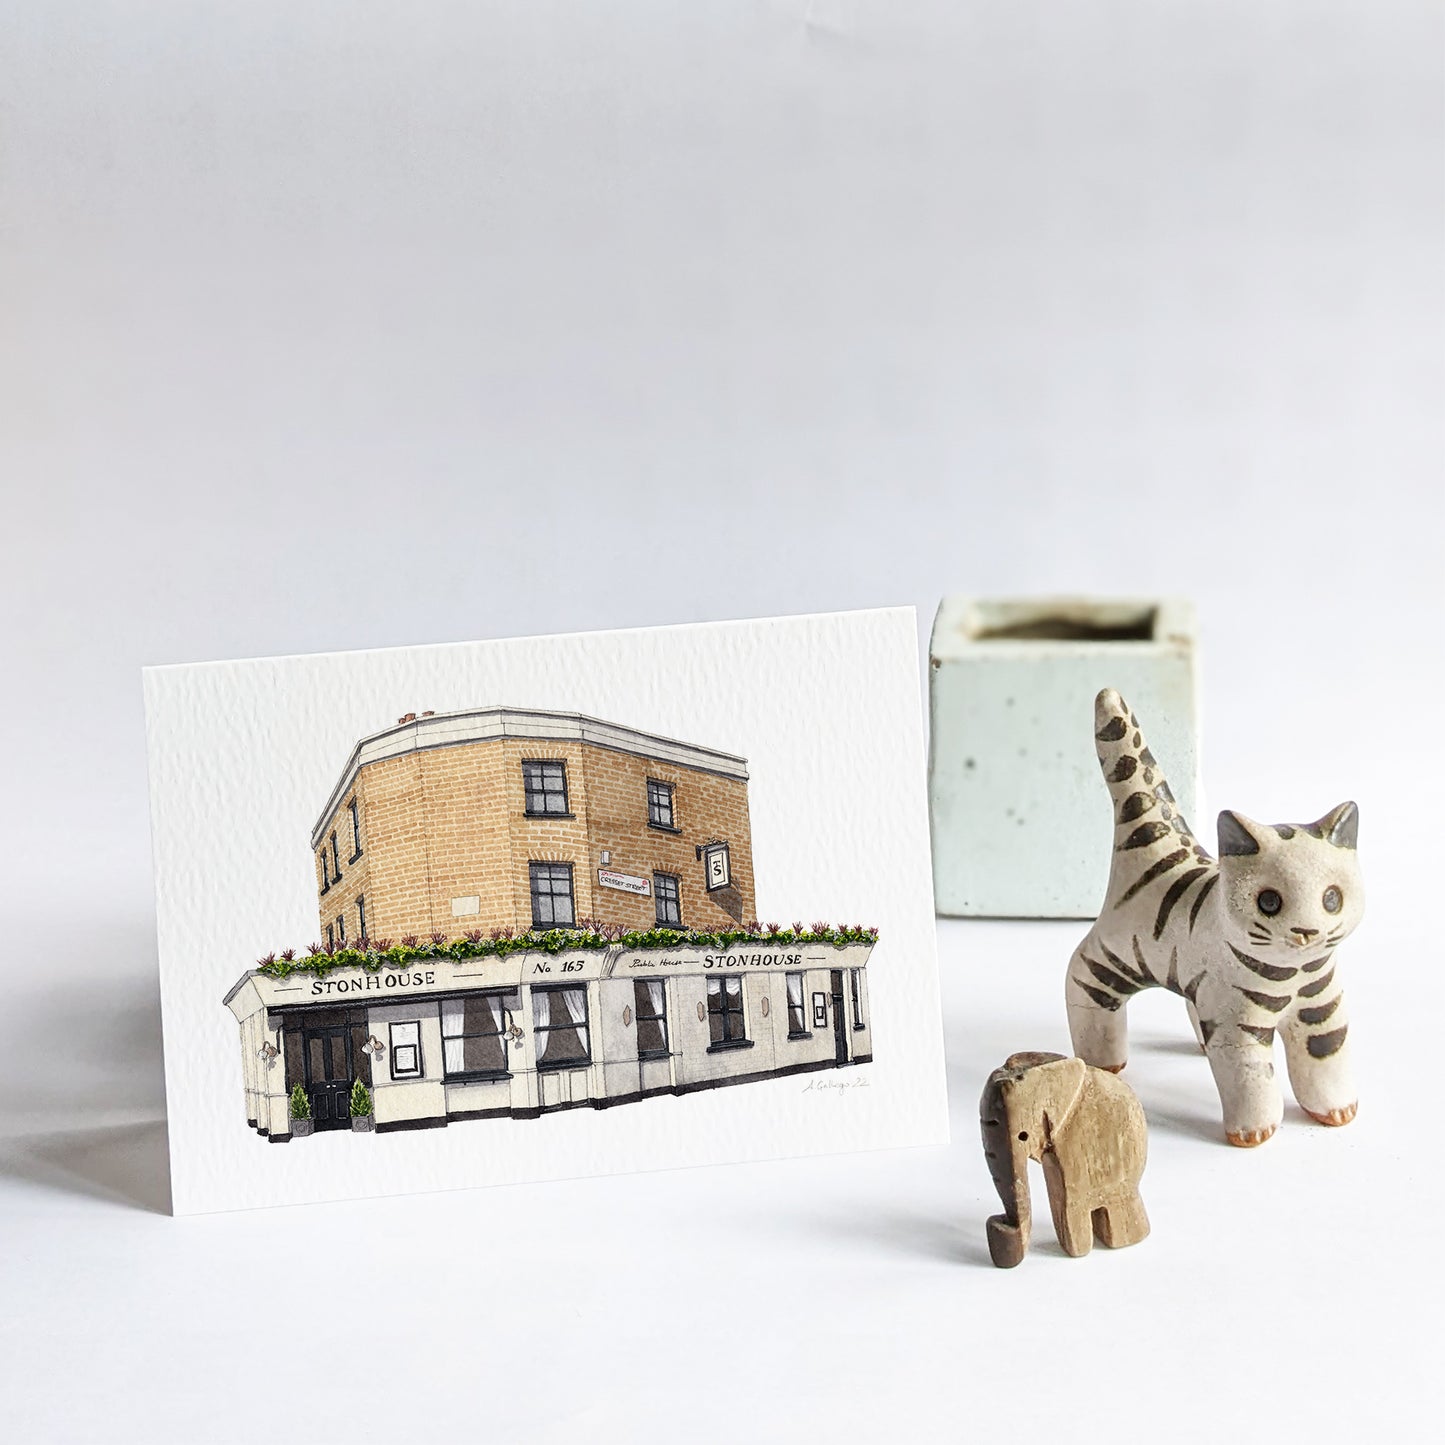 Clapham - The Stonhouse - Greeting card with envelope